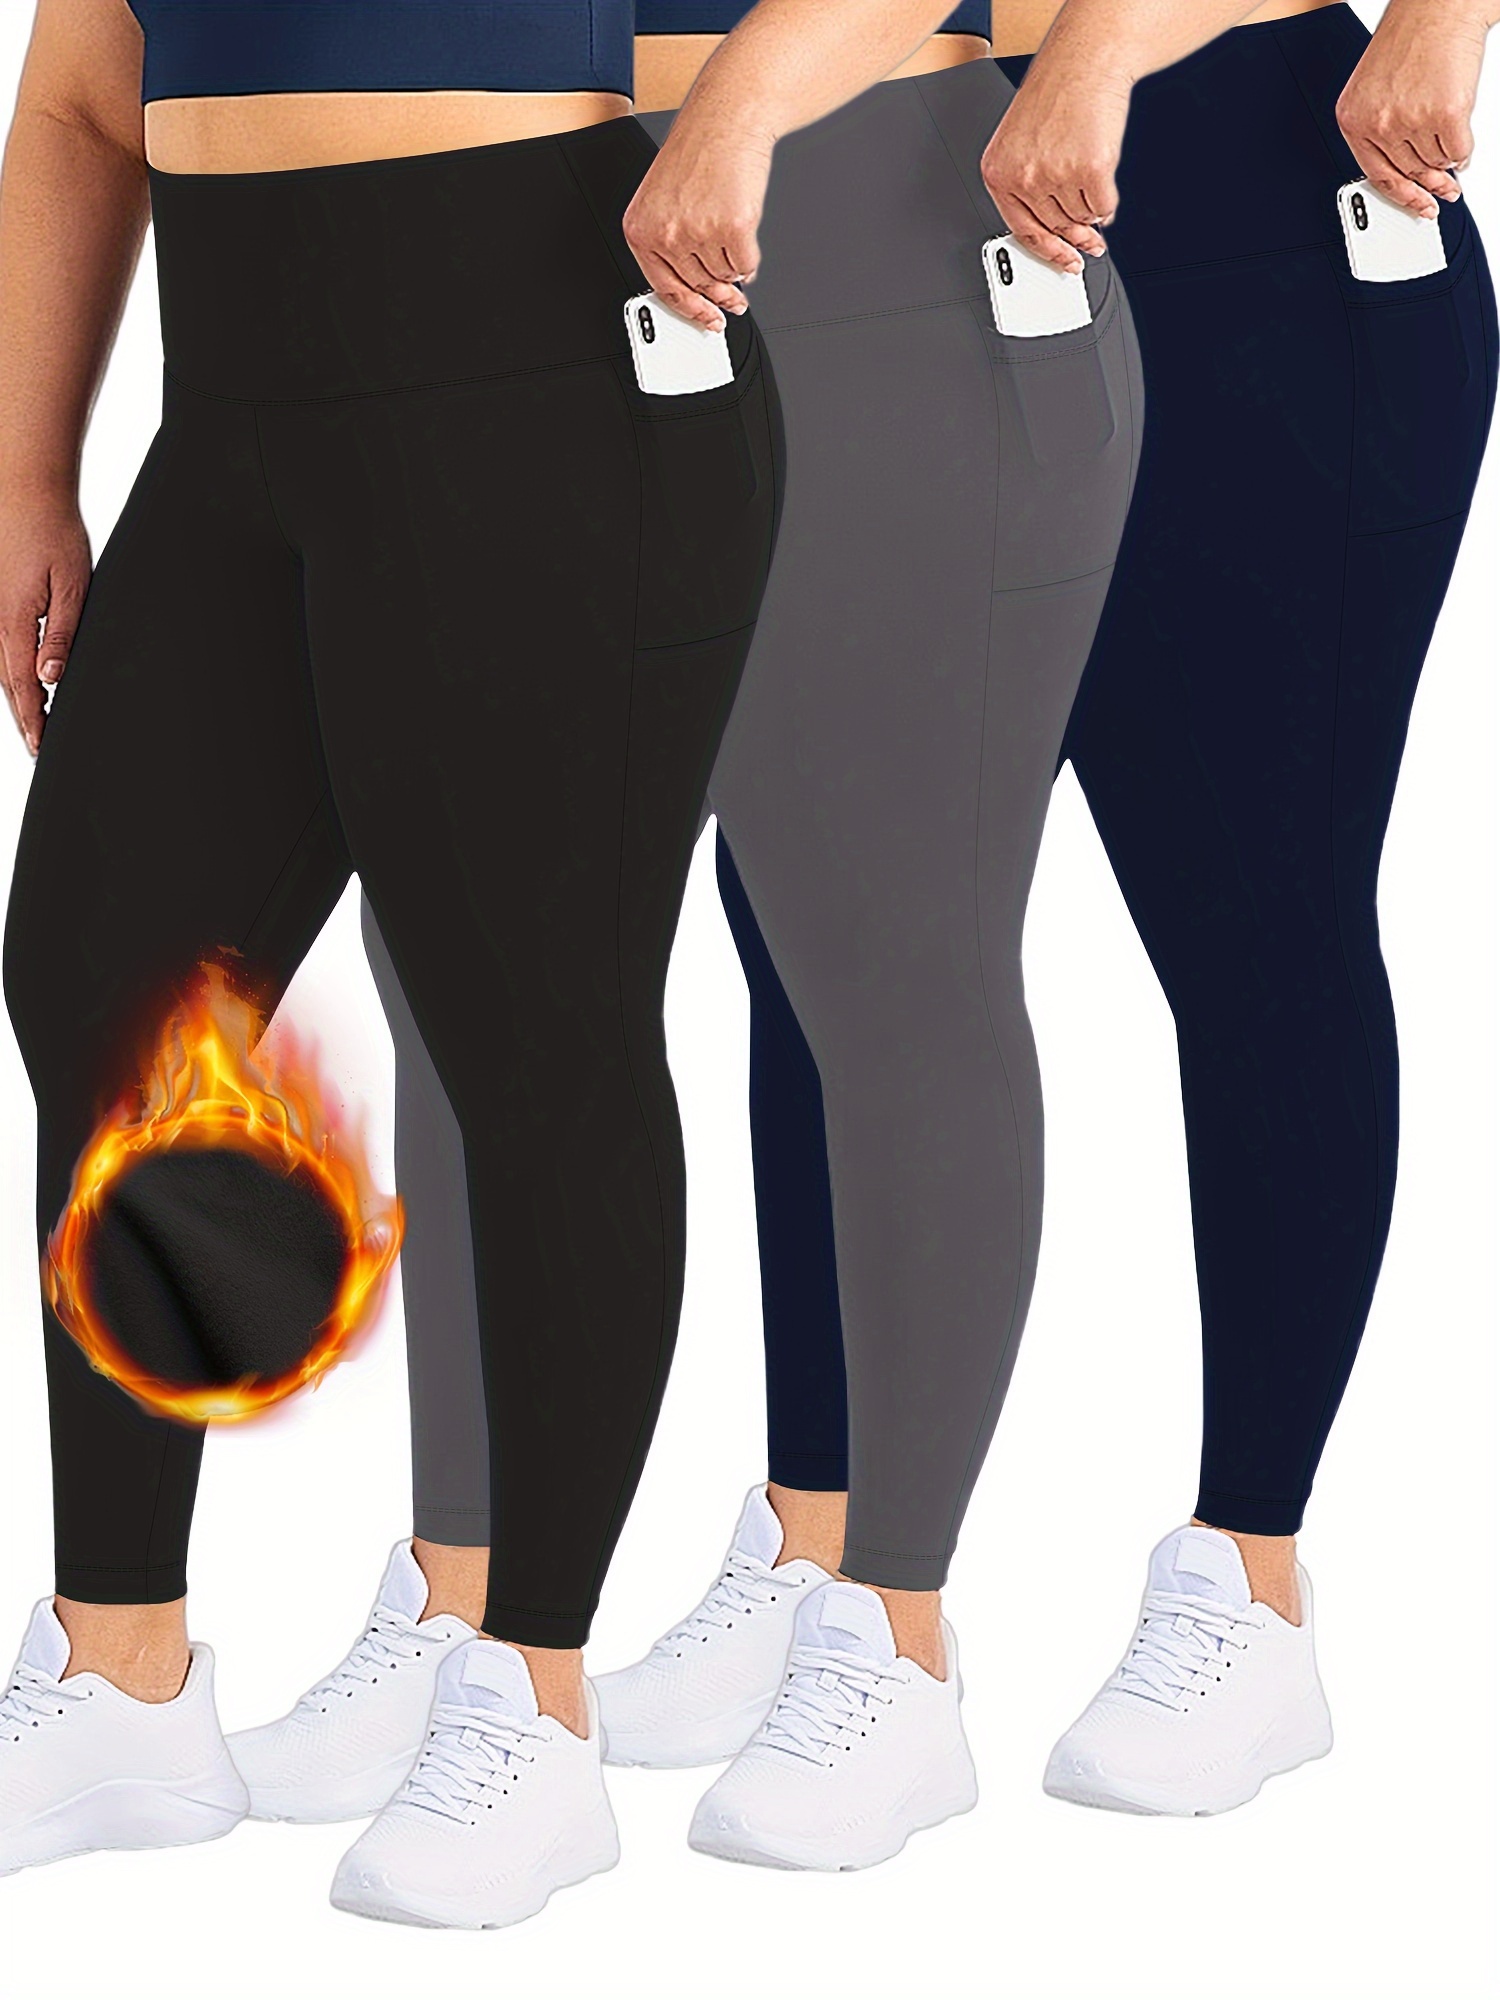 Is That The New Plus Solid Wideband Waist Leggings ??